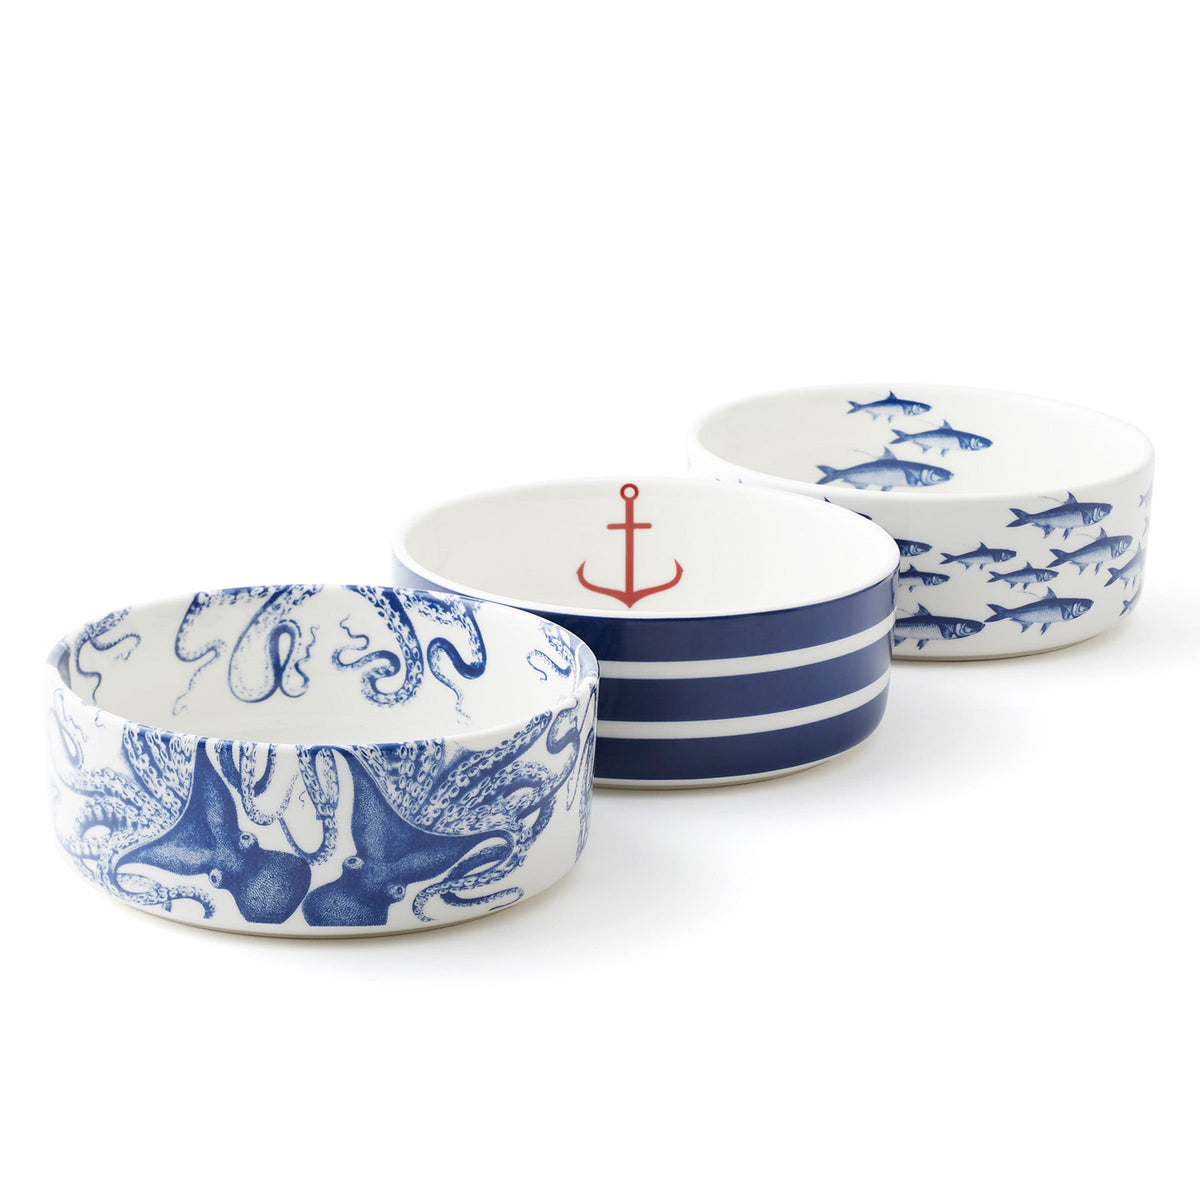 Three Caskata Lucy Medium Pet Bowls with blue and white octopus and anchor designs.